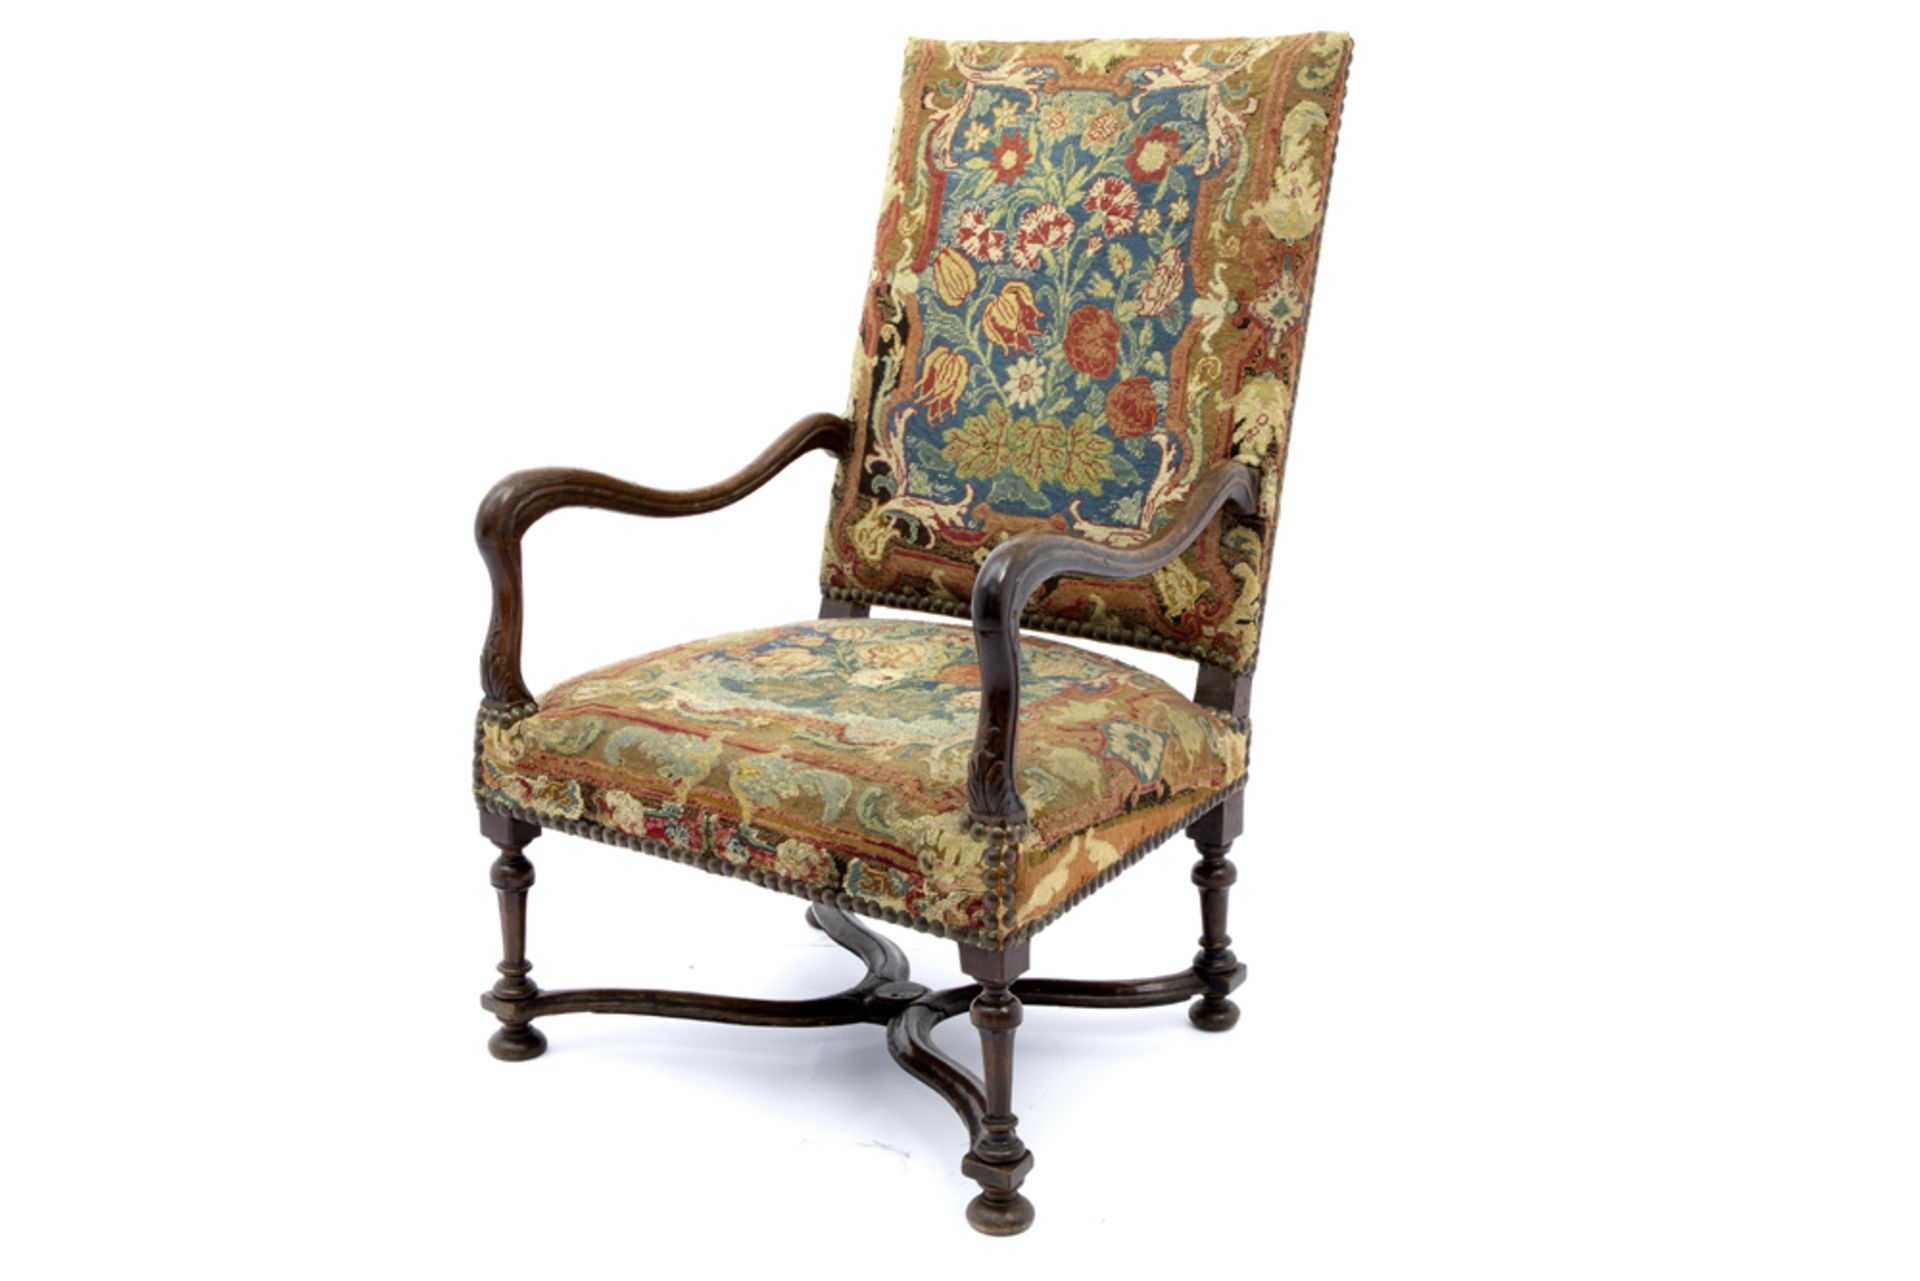 early 18th Cent. French armchair in oak from the Regency period (between Louis XIV and Louis